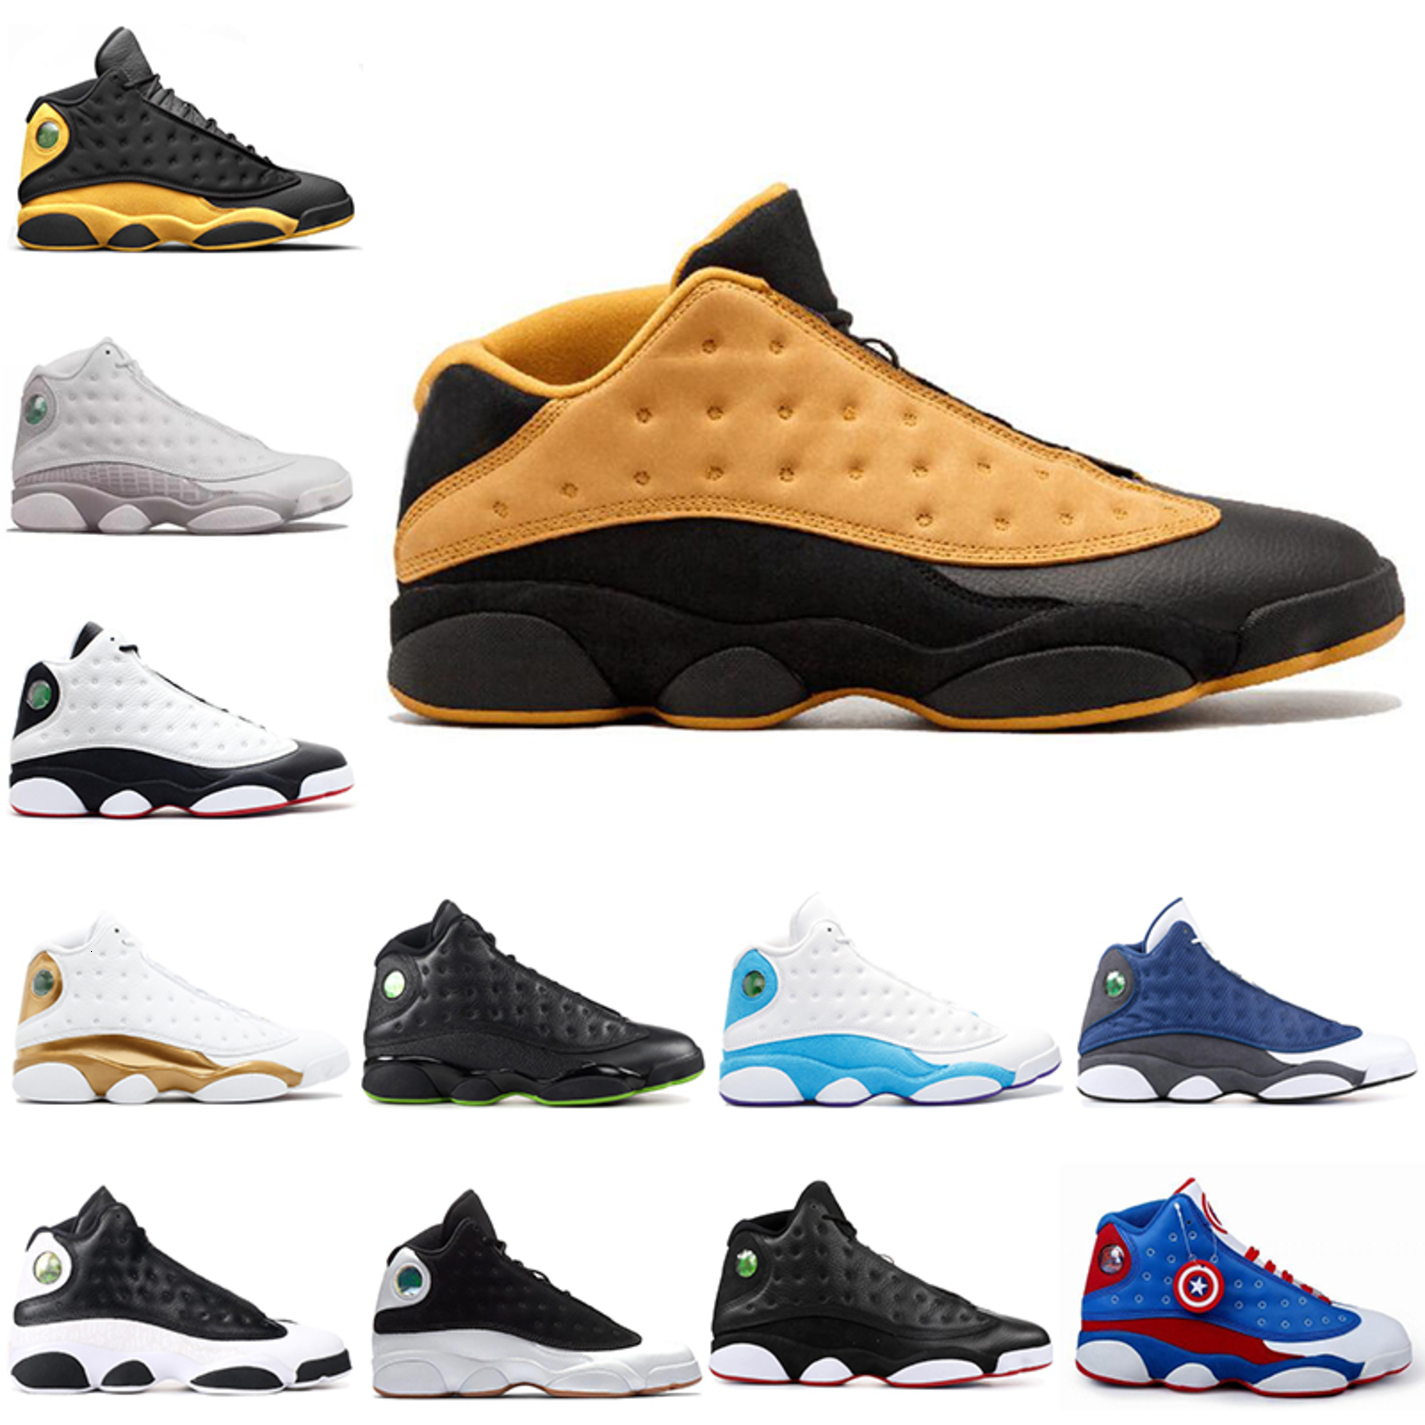 

Low Chutney 13s Men Basketball Shoes 13 Melo Class of 2002 cp3 home playoff black cat chicago Sports Sneakers Free Drop Shipping